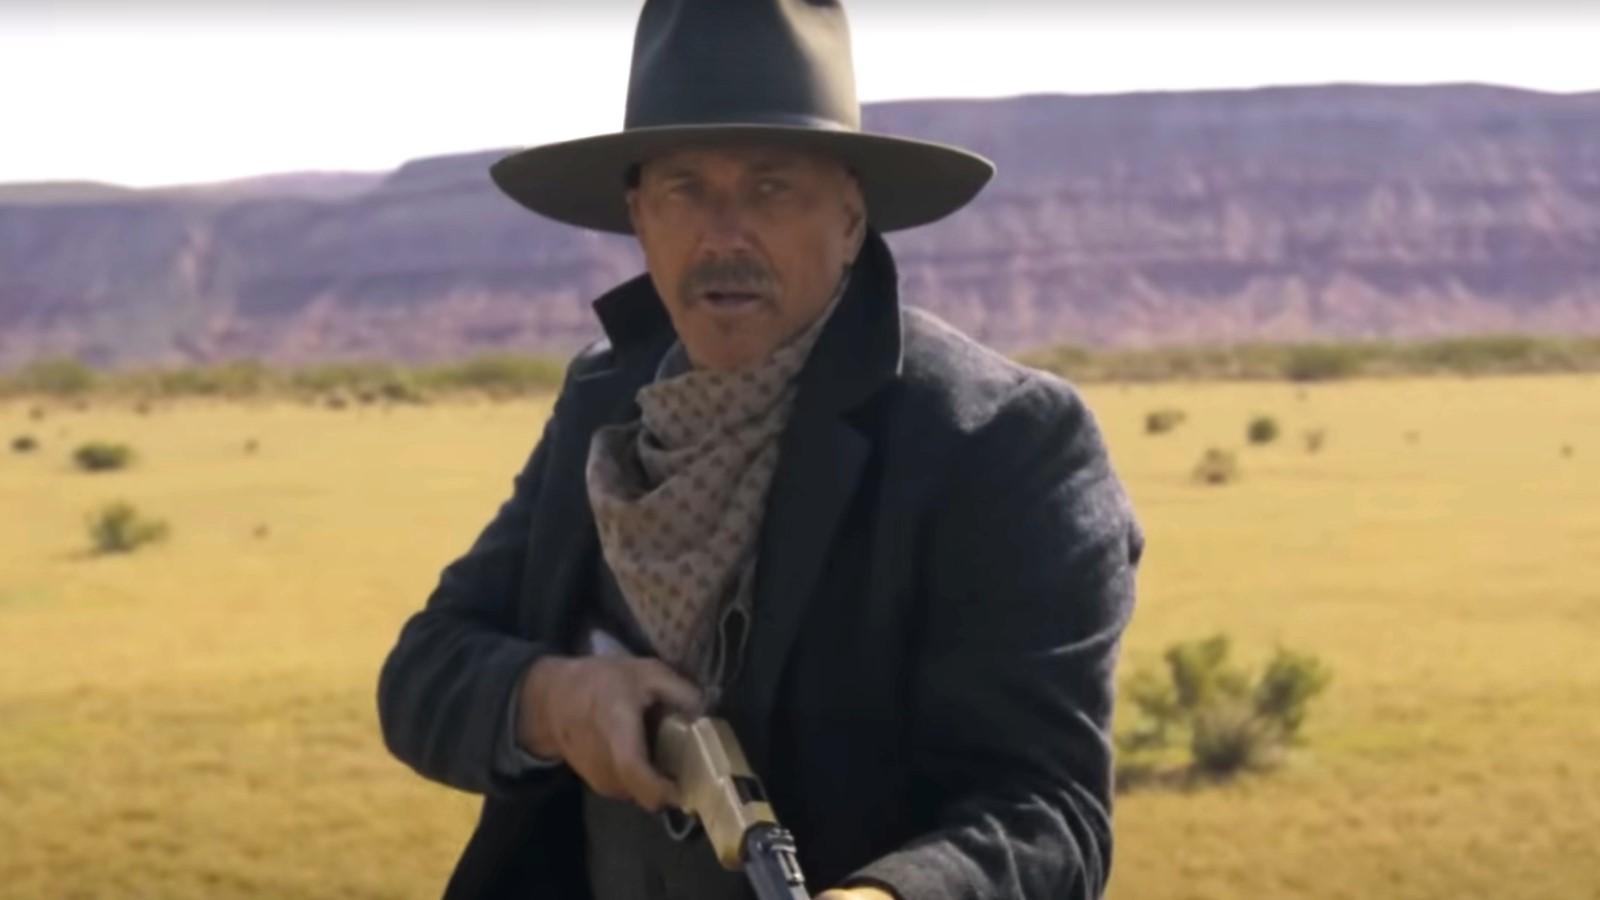 Kevin Costner in Horizon, standing in a field and holding a gun